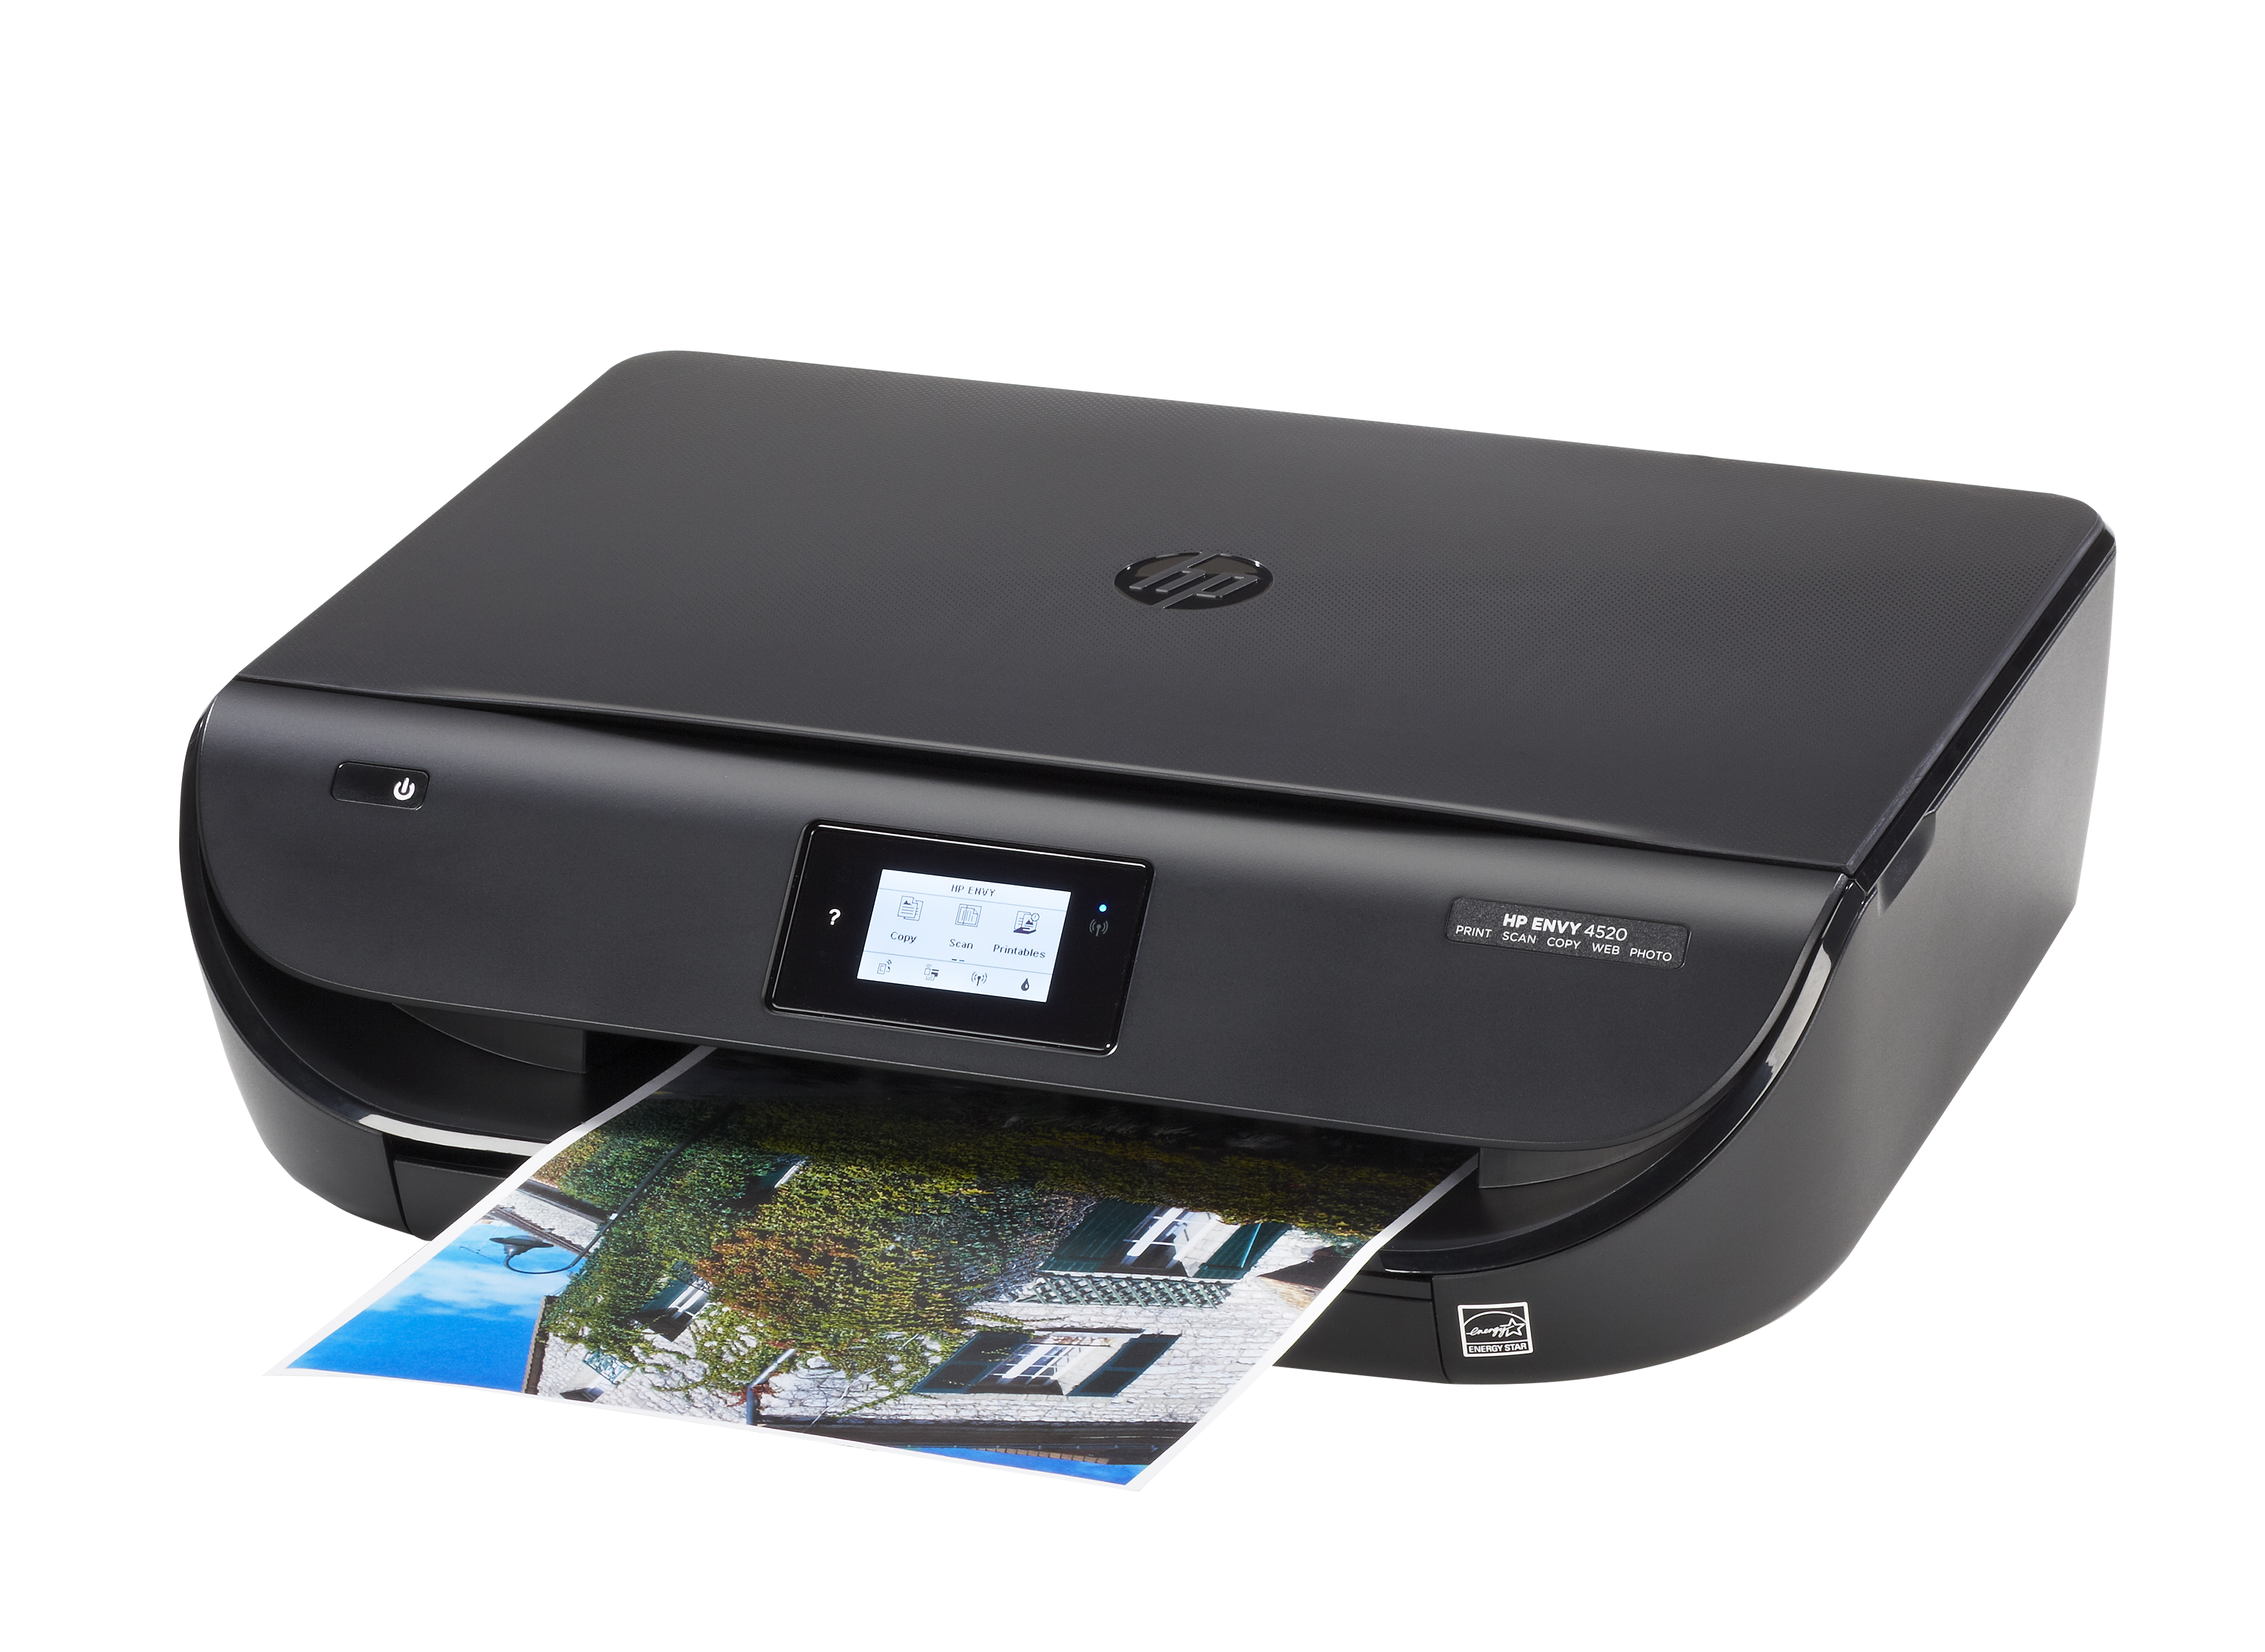 HP 4520 Printer Review - Reports